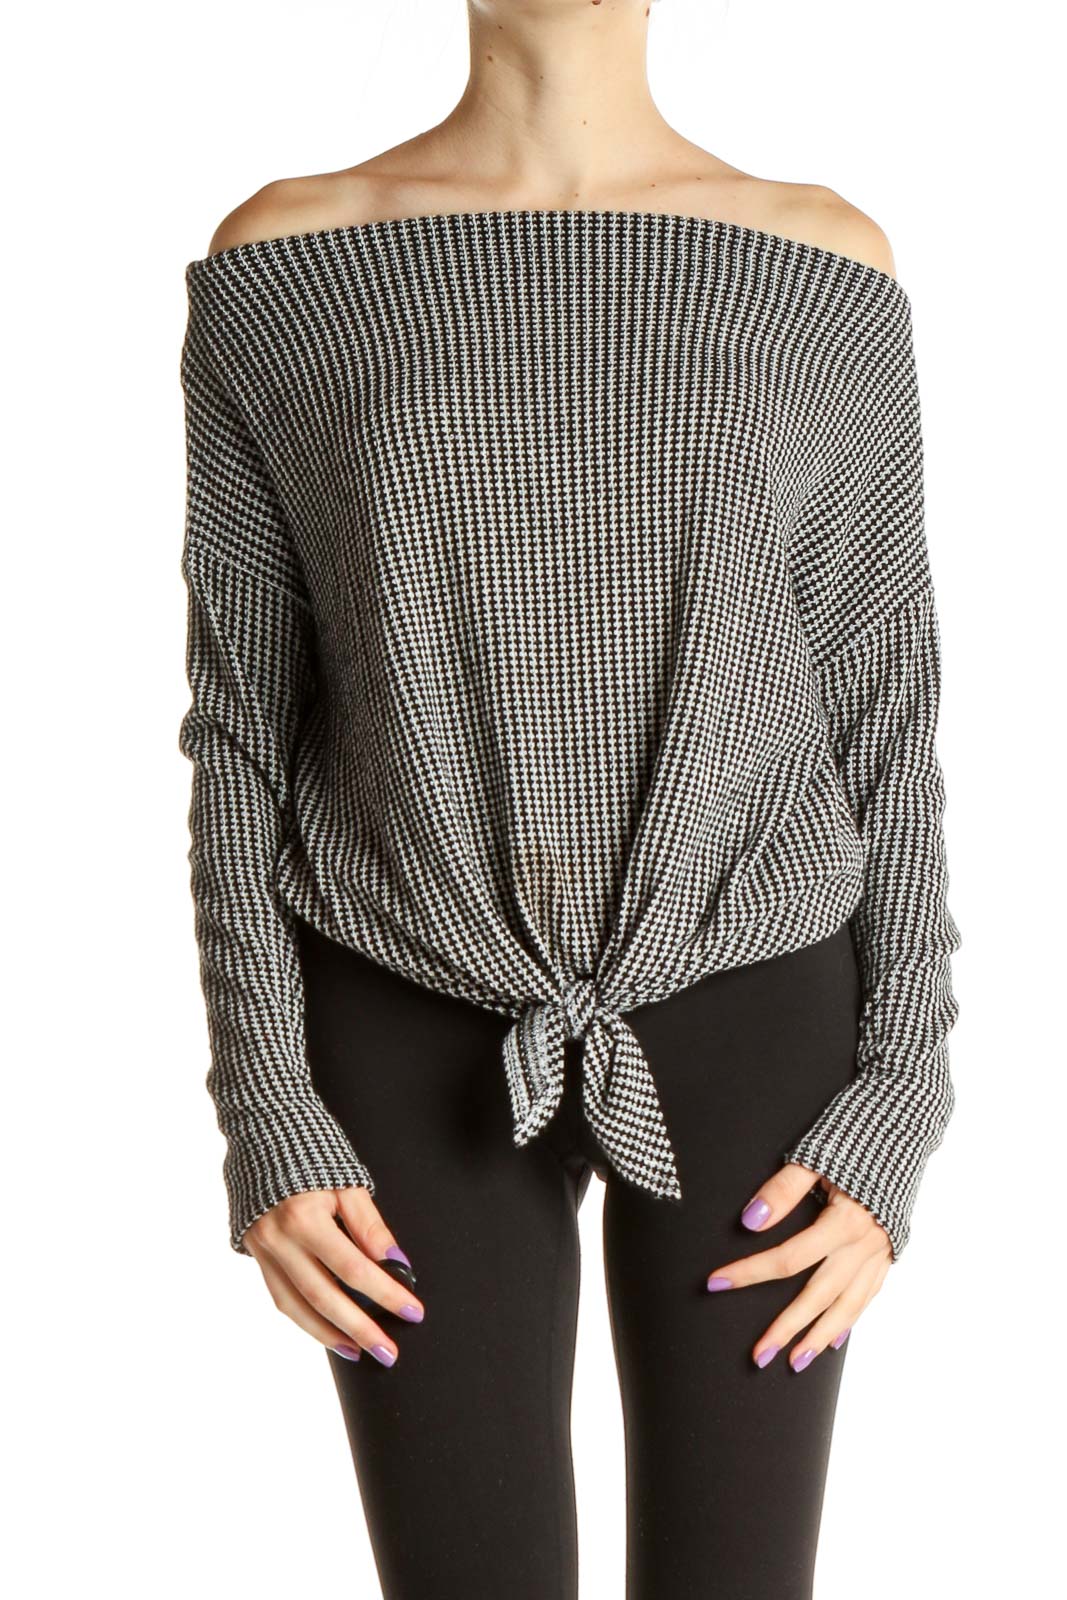 Black Striped Casual Blouse Front